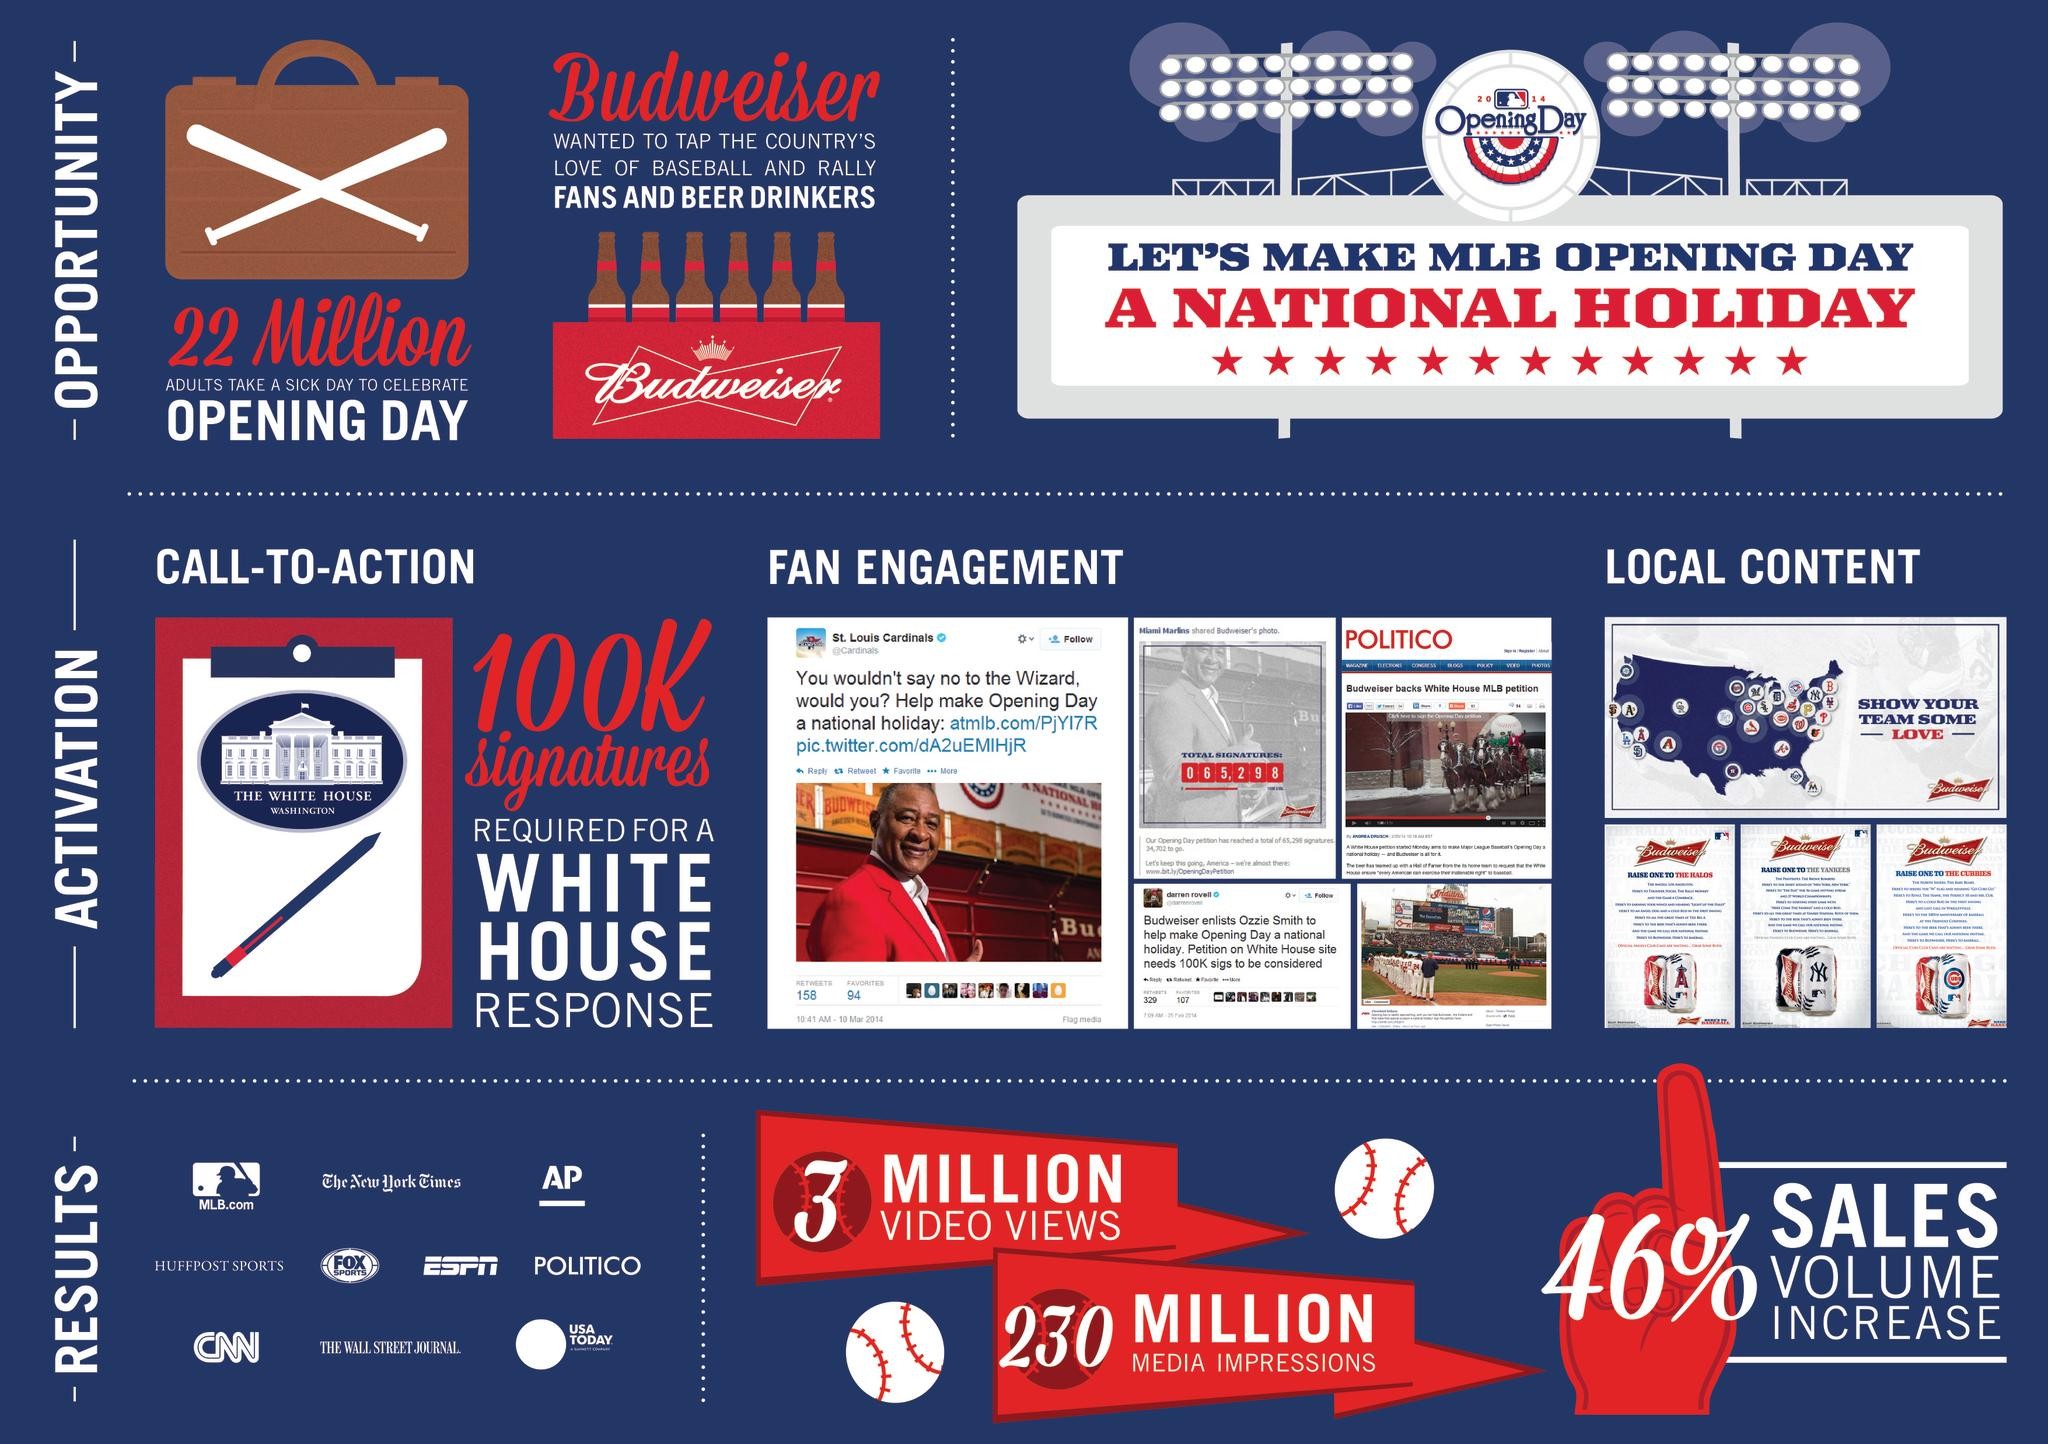 BUDWEISER: MAKE OPENING DAY A NATIONAL HOLIDAY